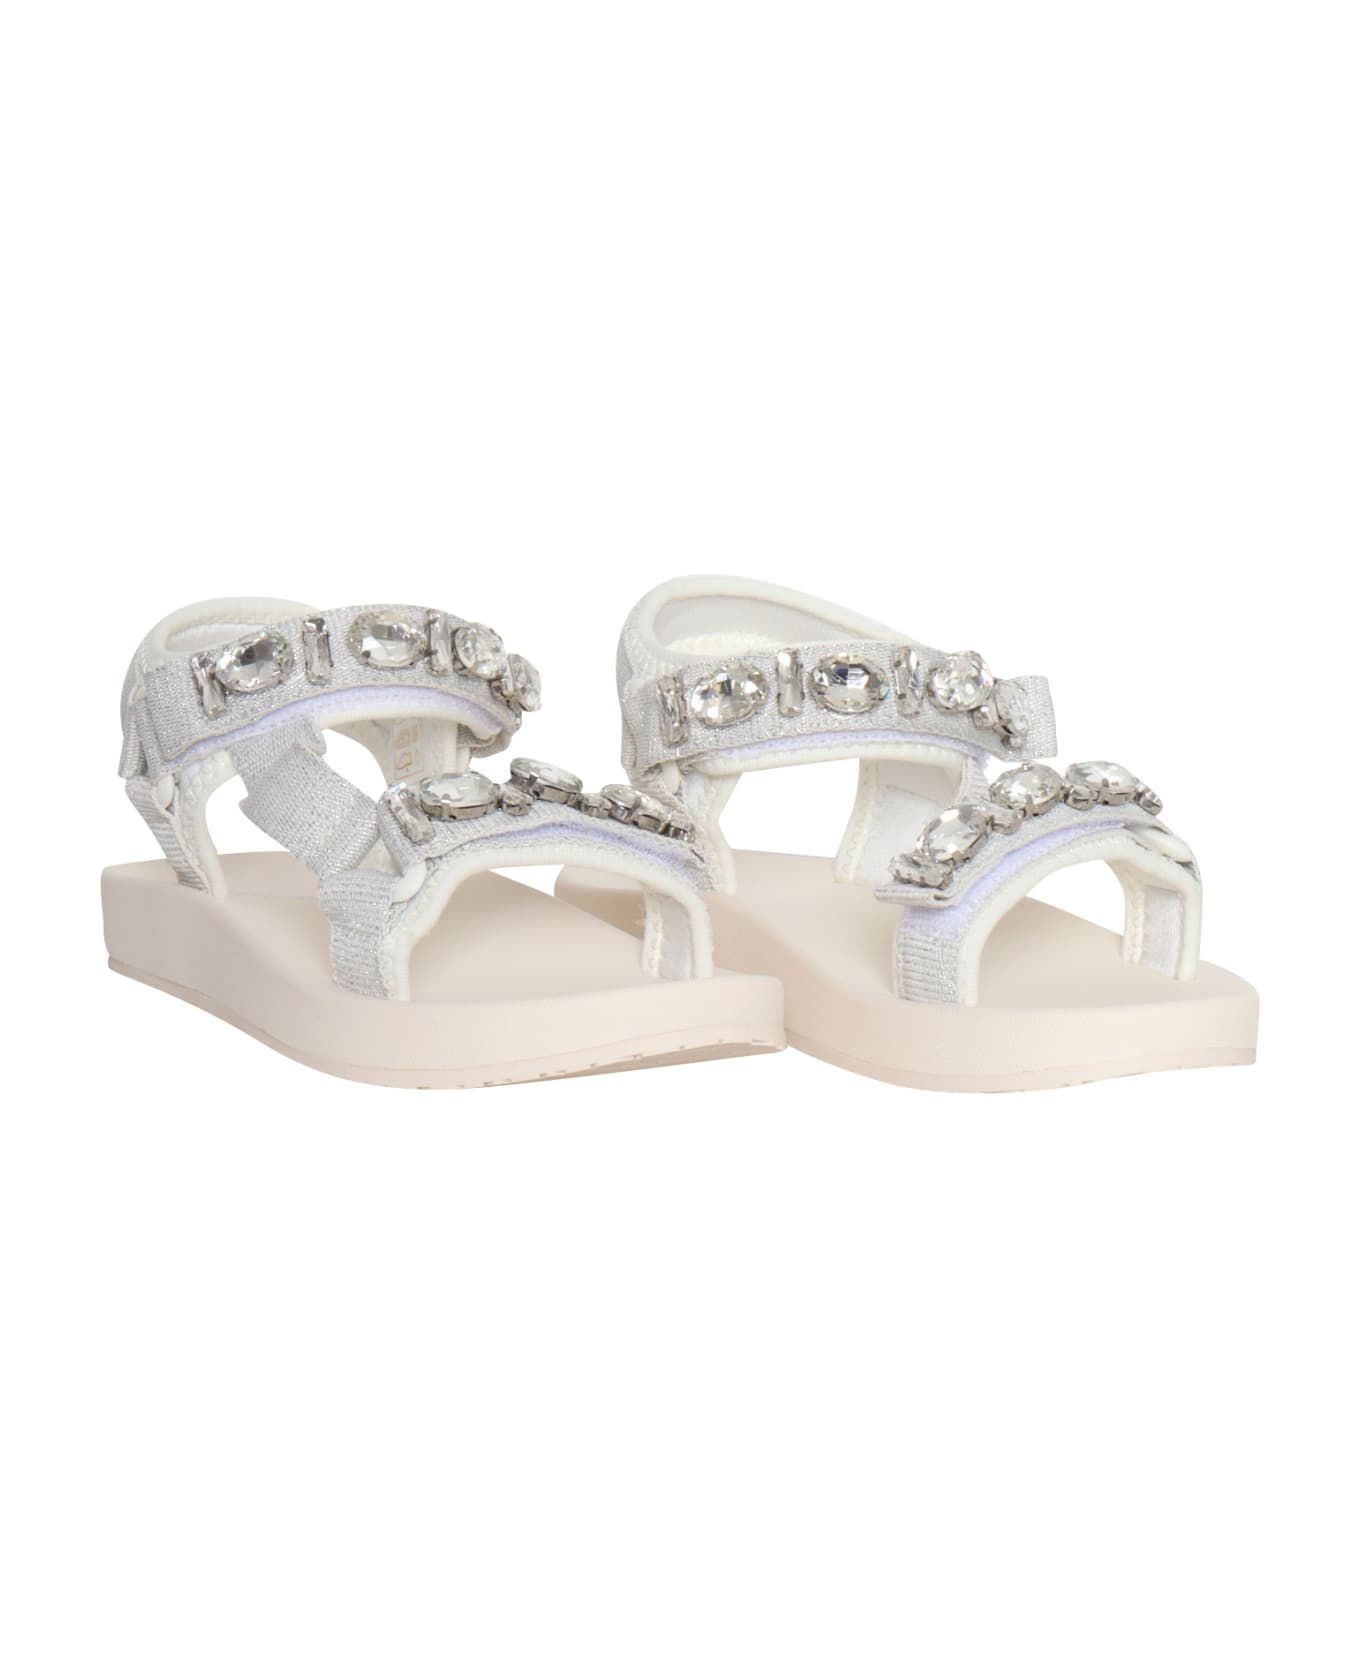 Monnalisa Silver Sandals With Applications - SILVER